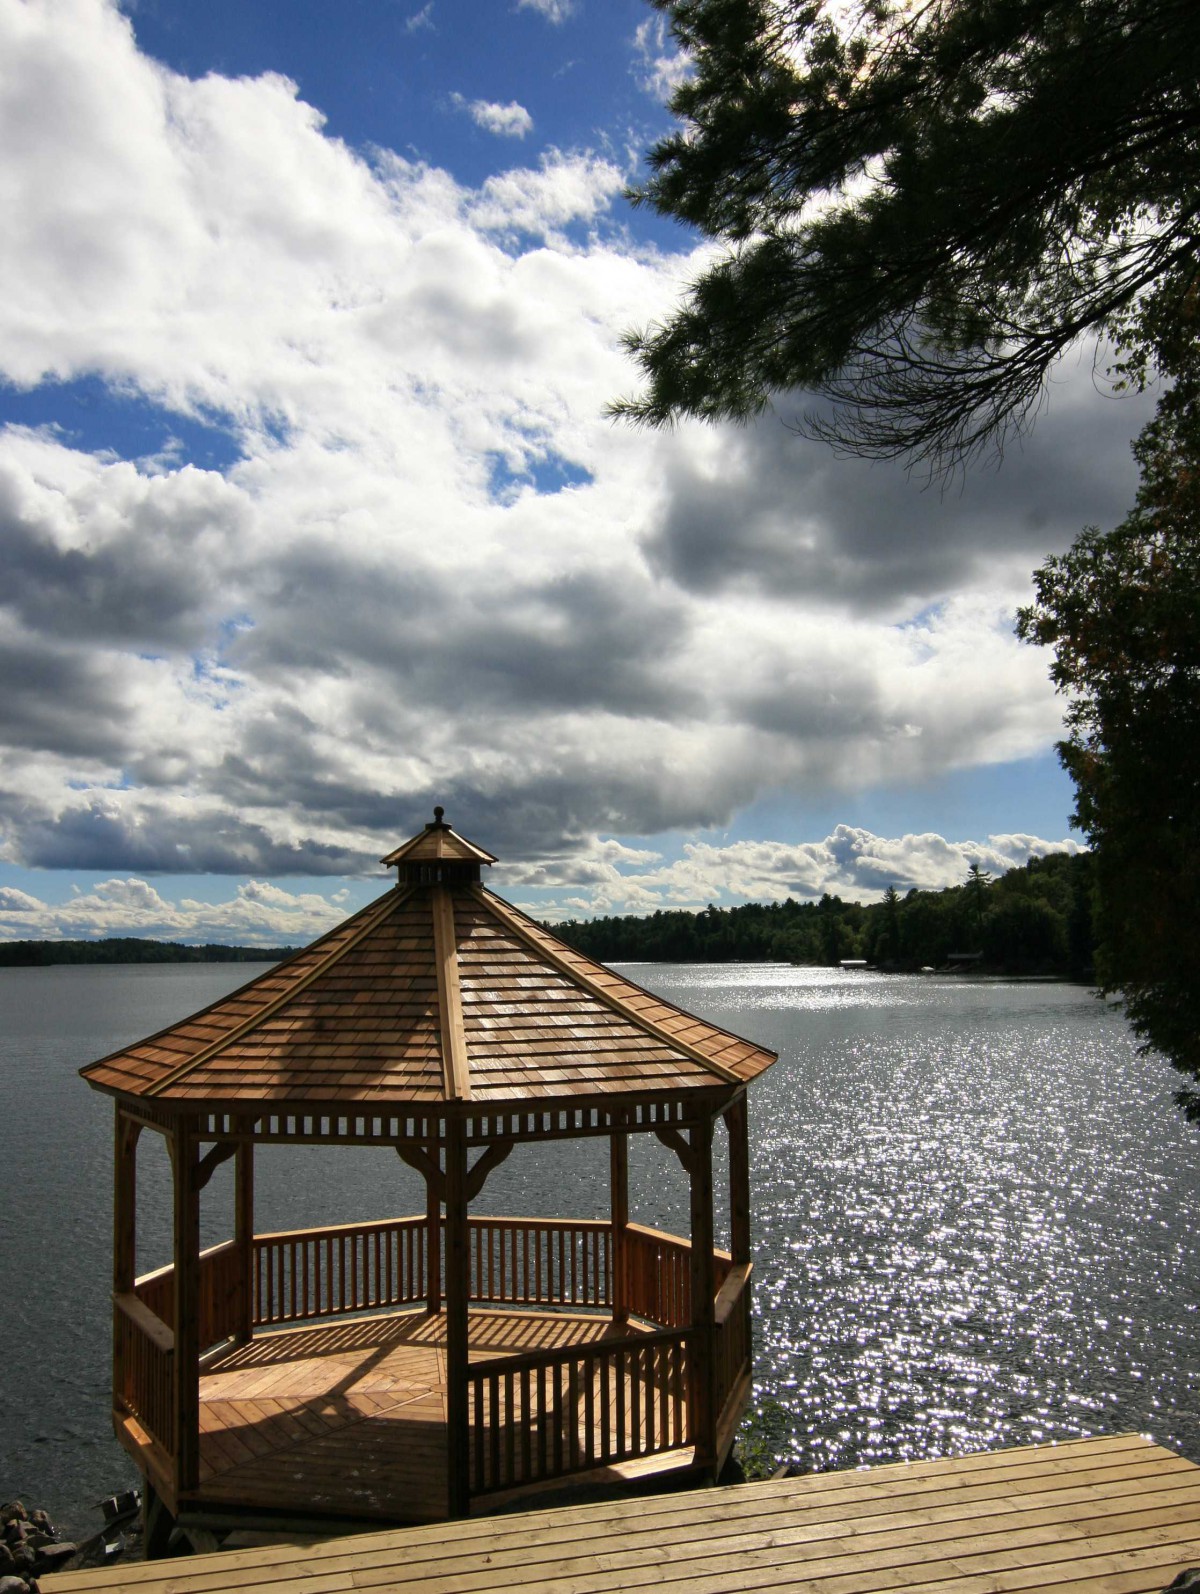 Lakeside Monterey gazebo plan 14' in Minden, Ontario seen from the frontage 2. ID number 3121